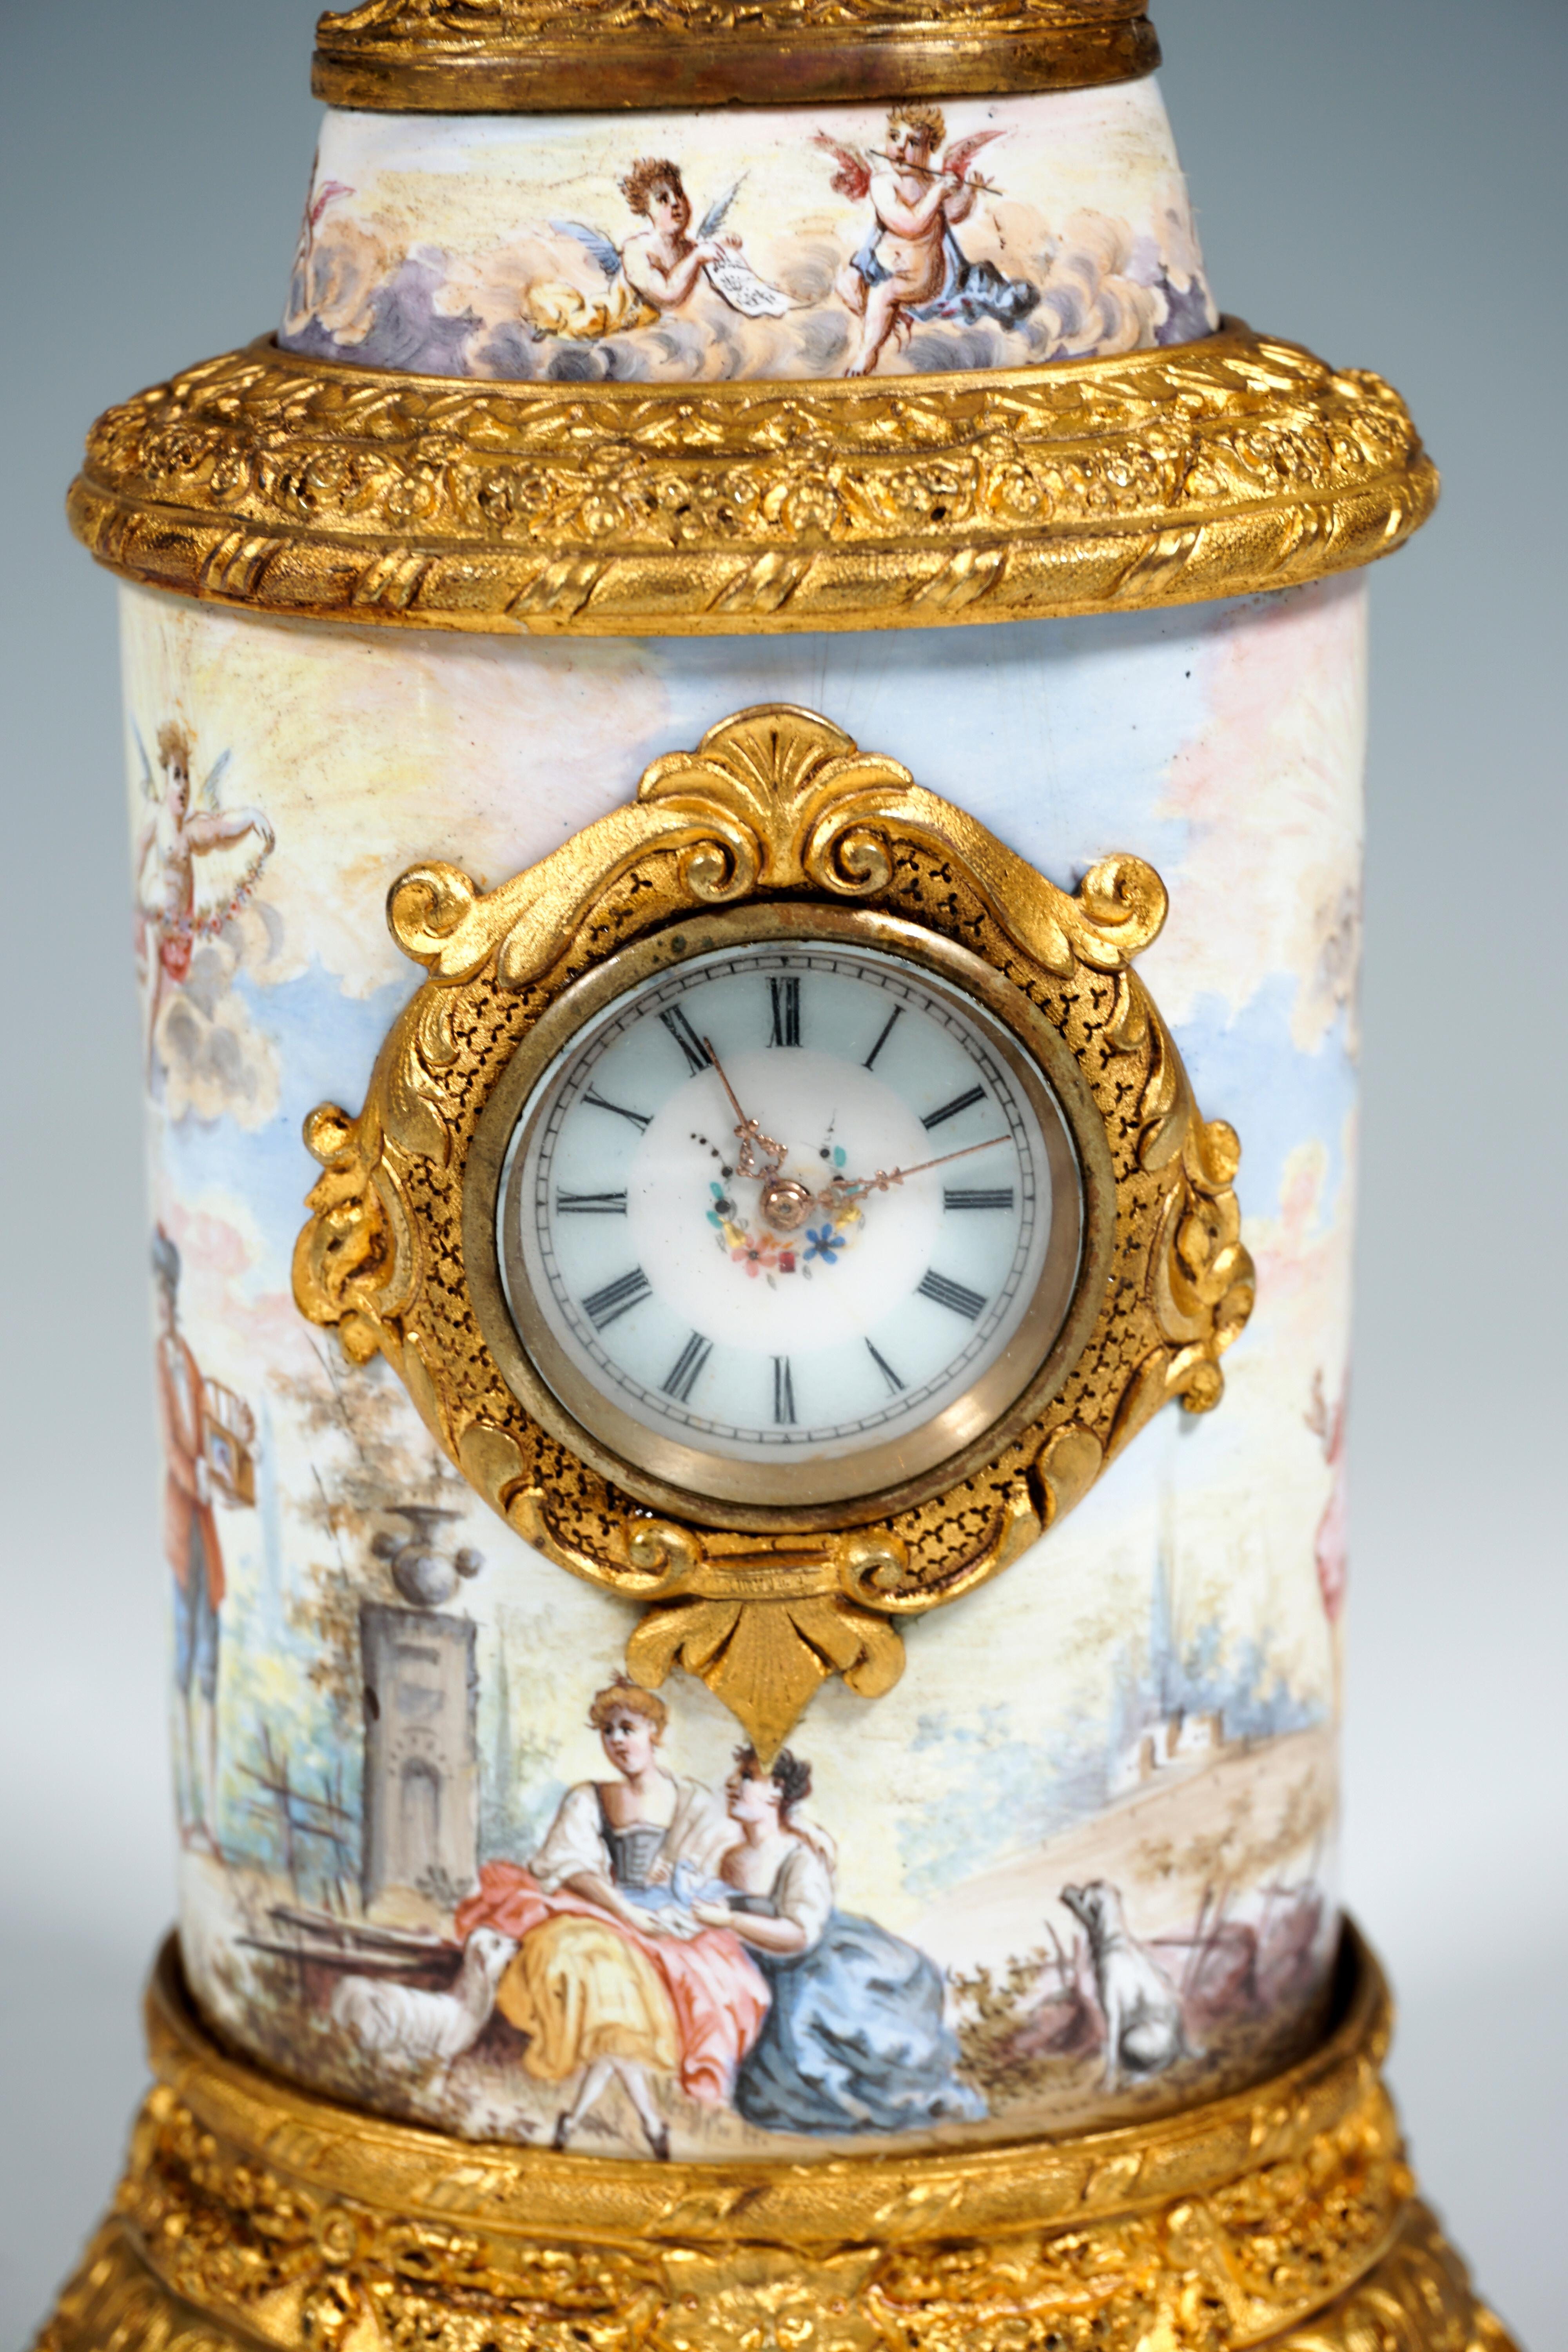 Austrian 19th Century Viennese Enamel Table Clock with Fire-Gilding and Watteau Painting For Sale